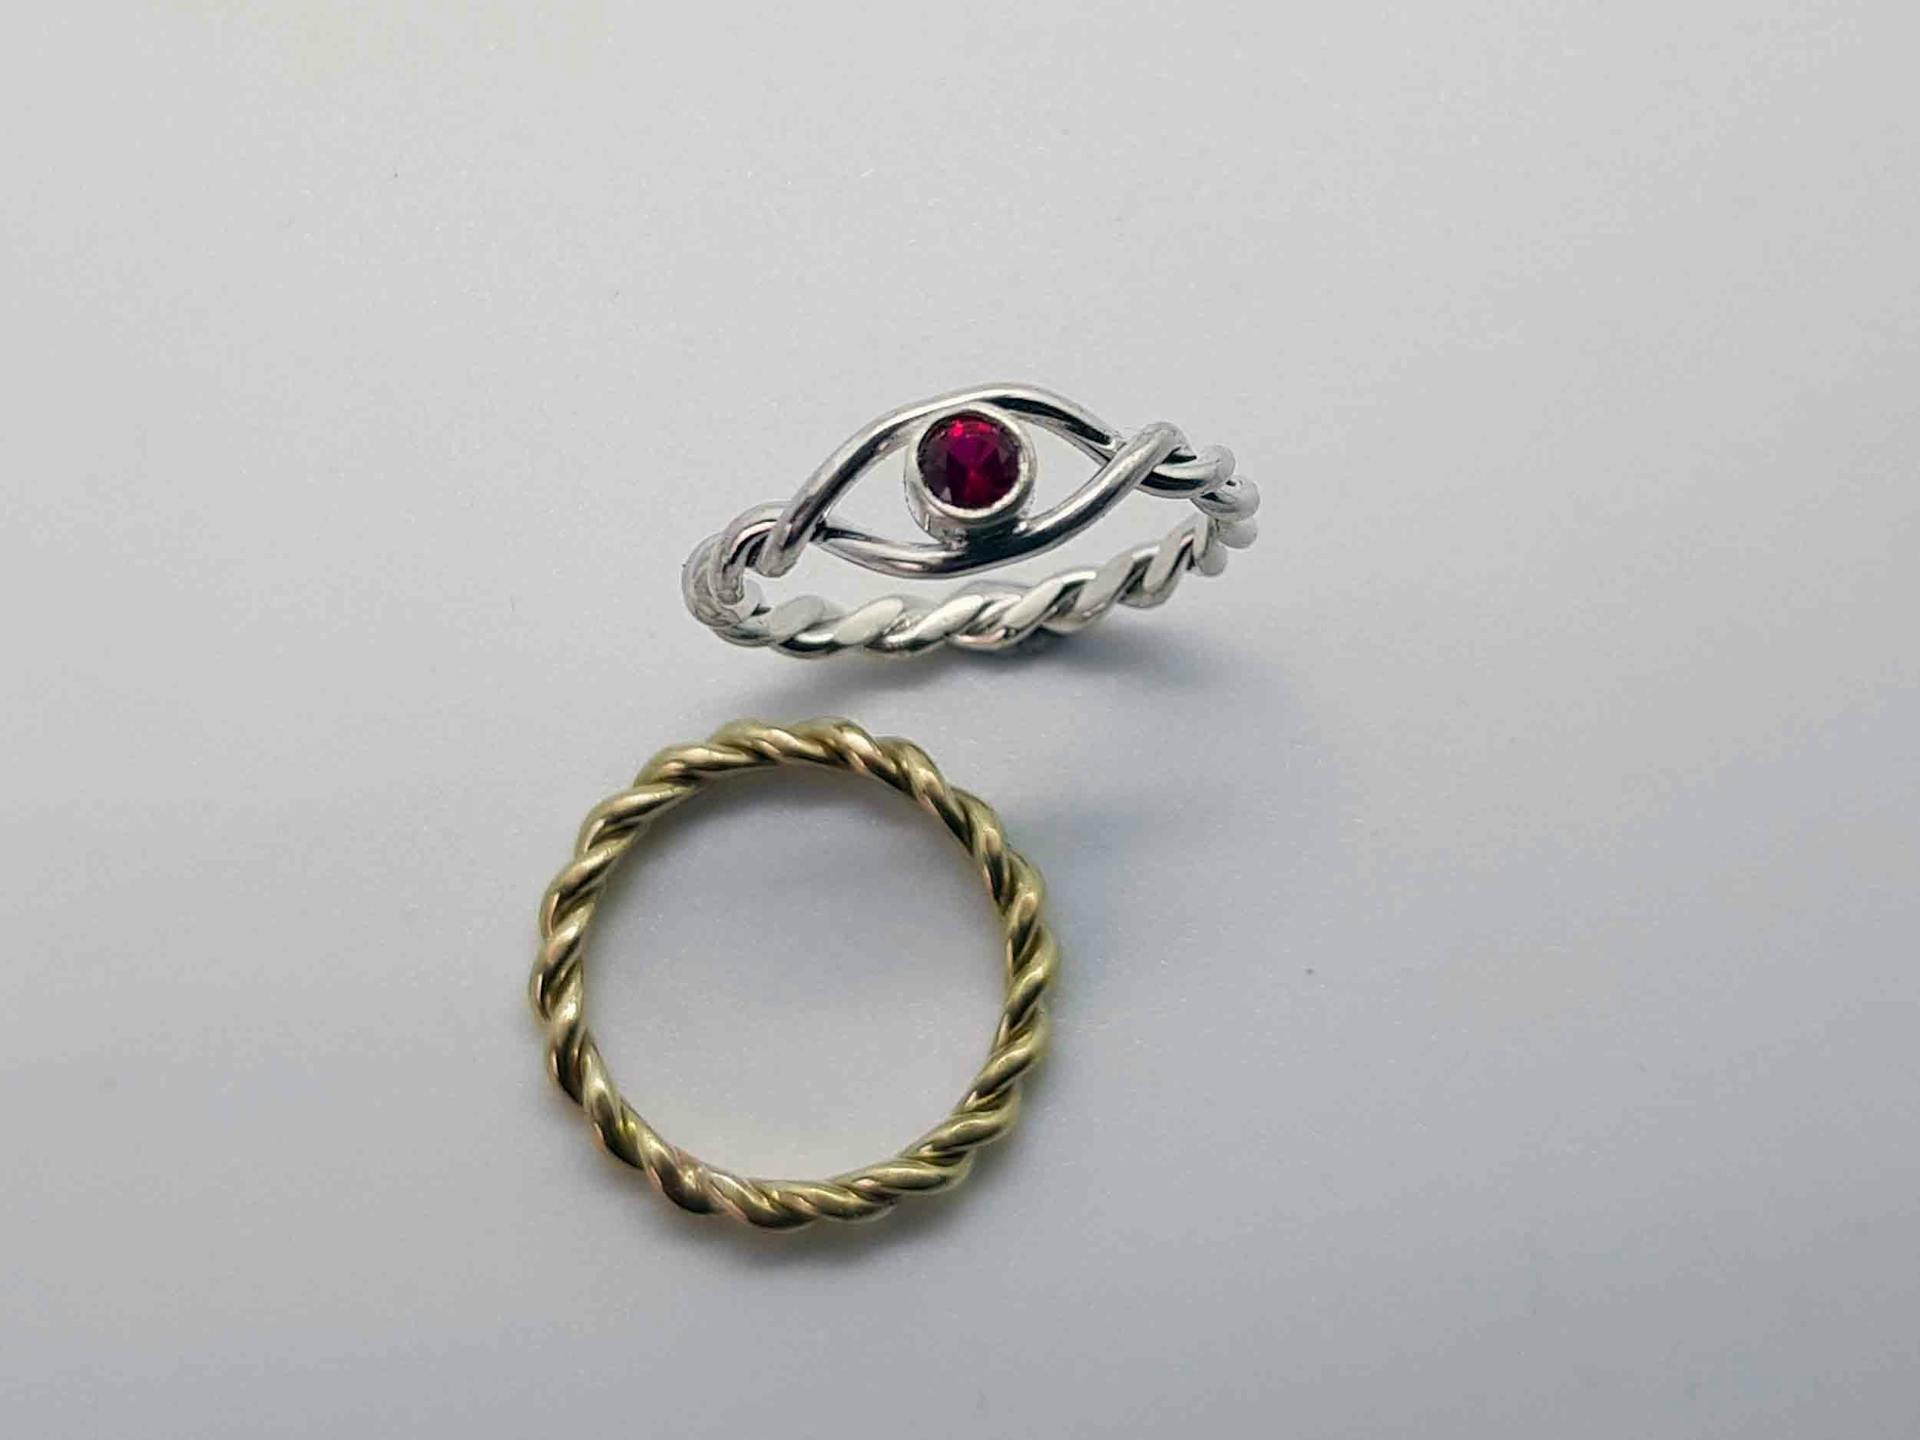 How to Make a Stone Set Twist Wire Ring